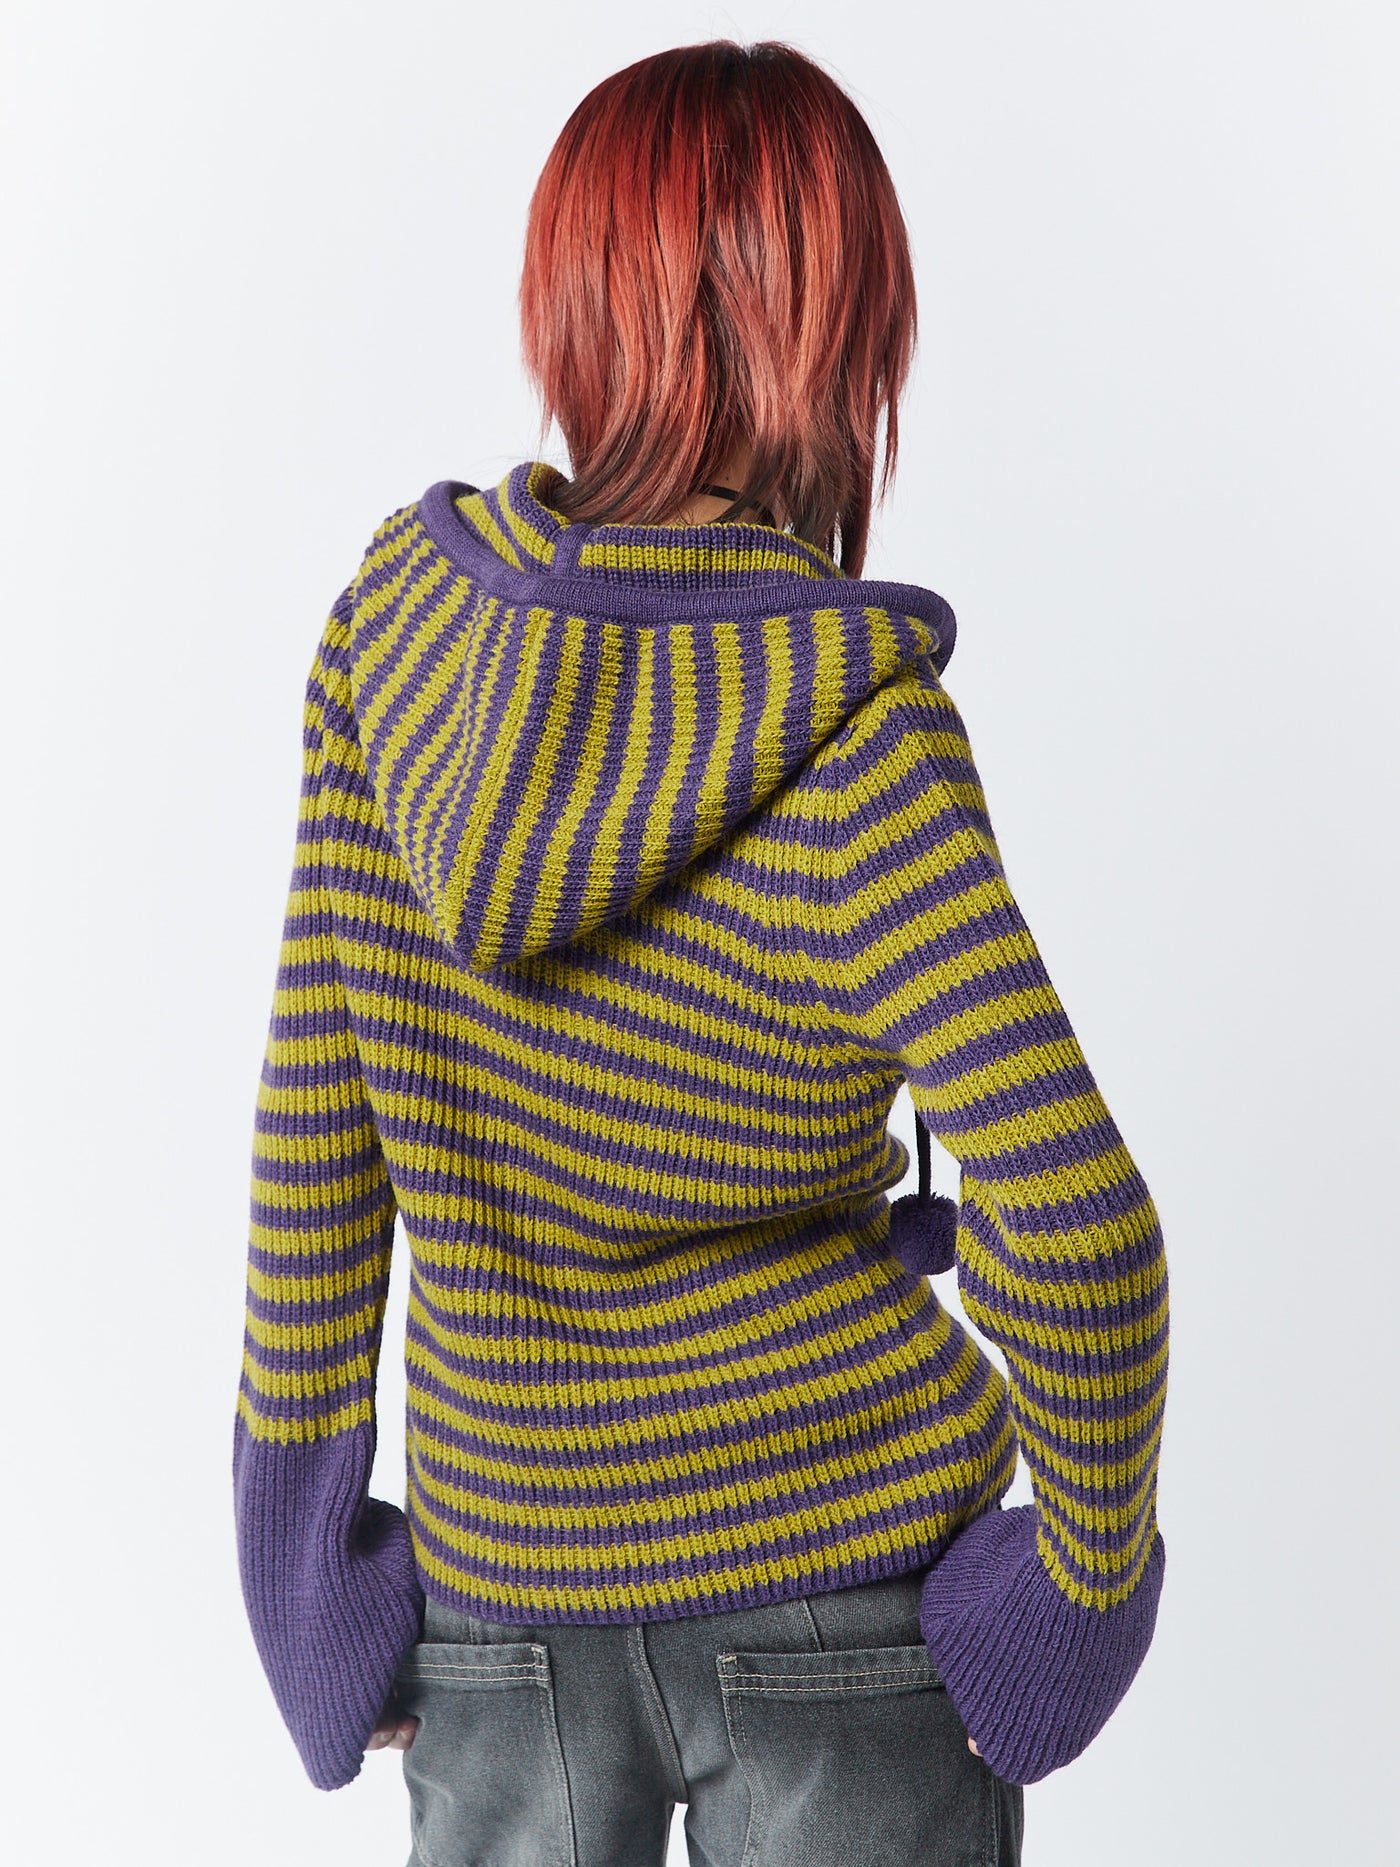 A knitted hoodie named Paige in a vibrant yellow and purple color combination by Minga London. This hoodie offers a cozy and stylish option, with its colorful knit and comfortable design perfect for adding a pop of color to your wardrobe.